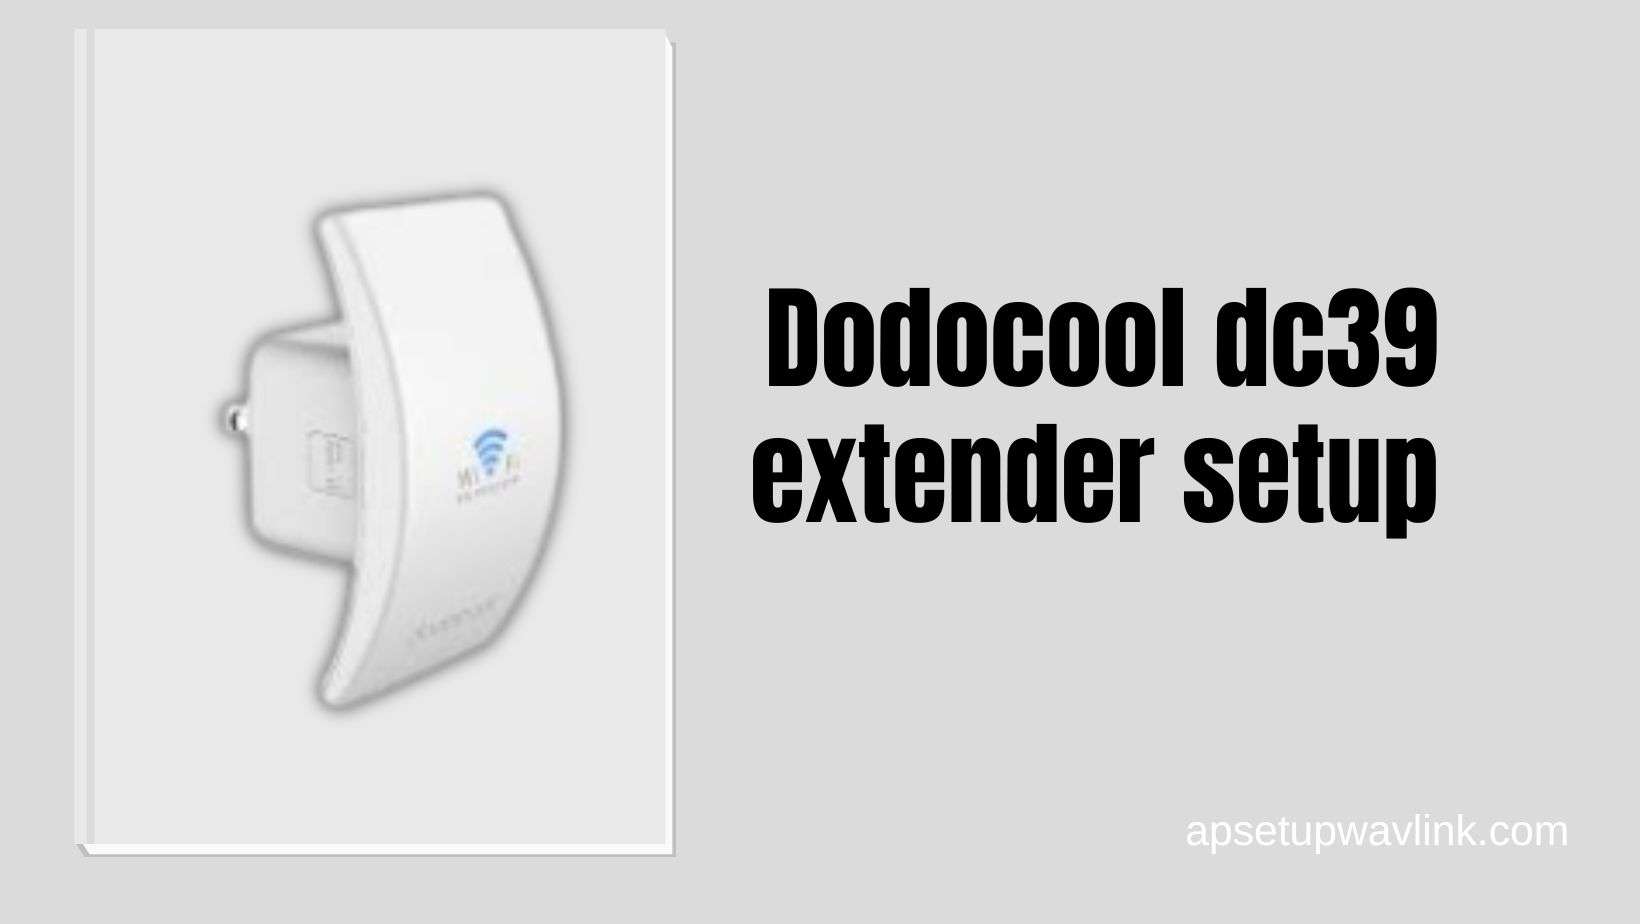 You are currently viewing How to Setup New Dodocool Extender DC39